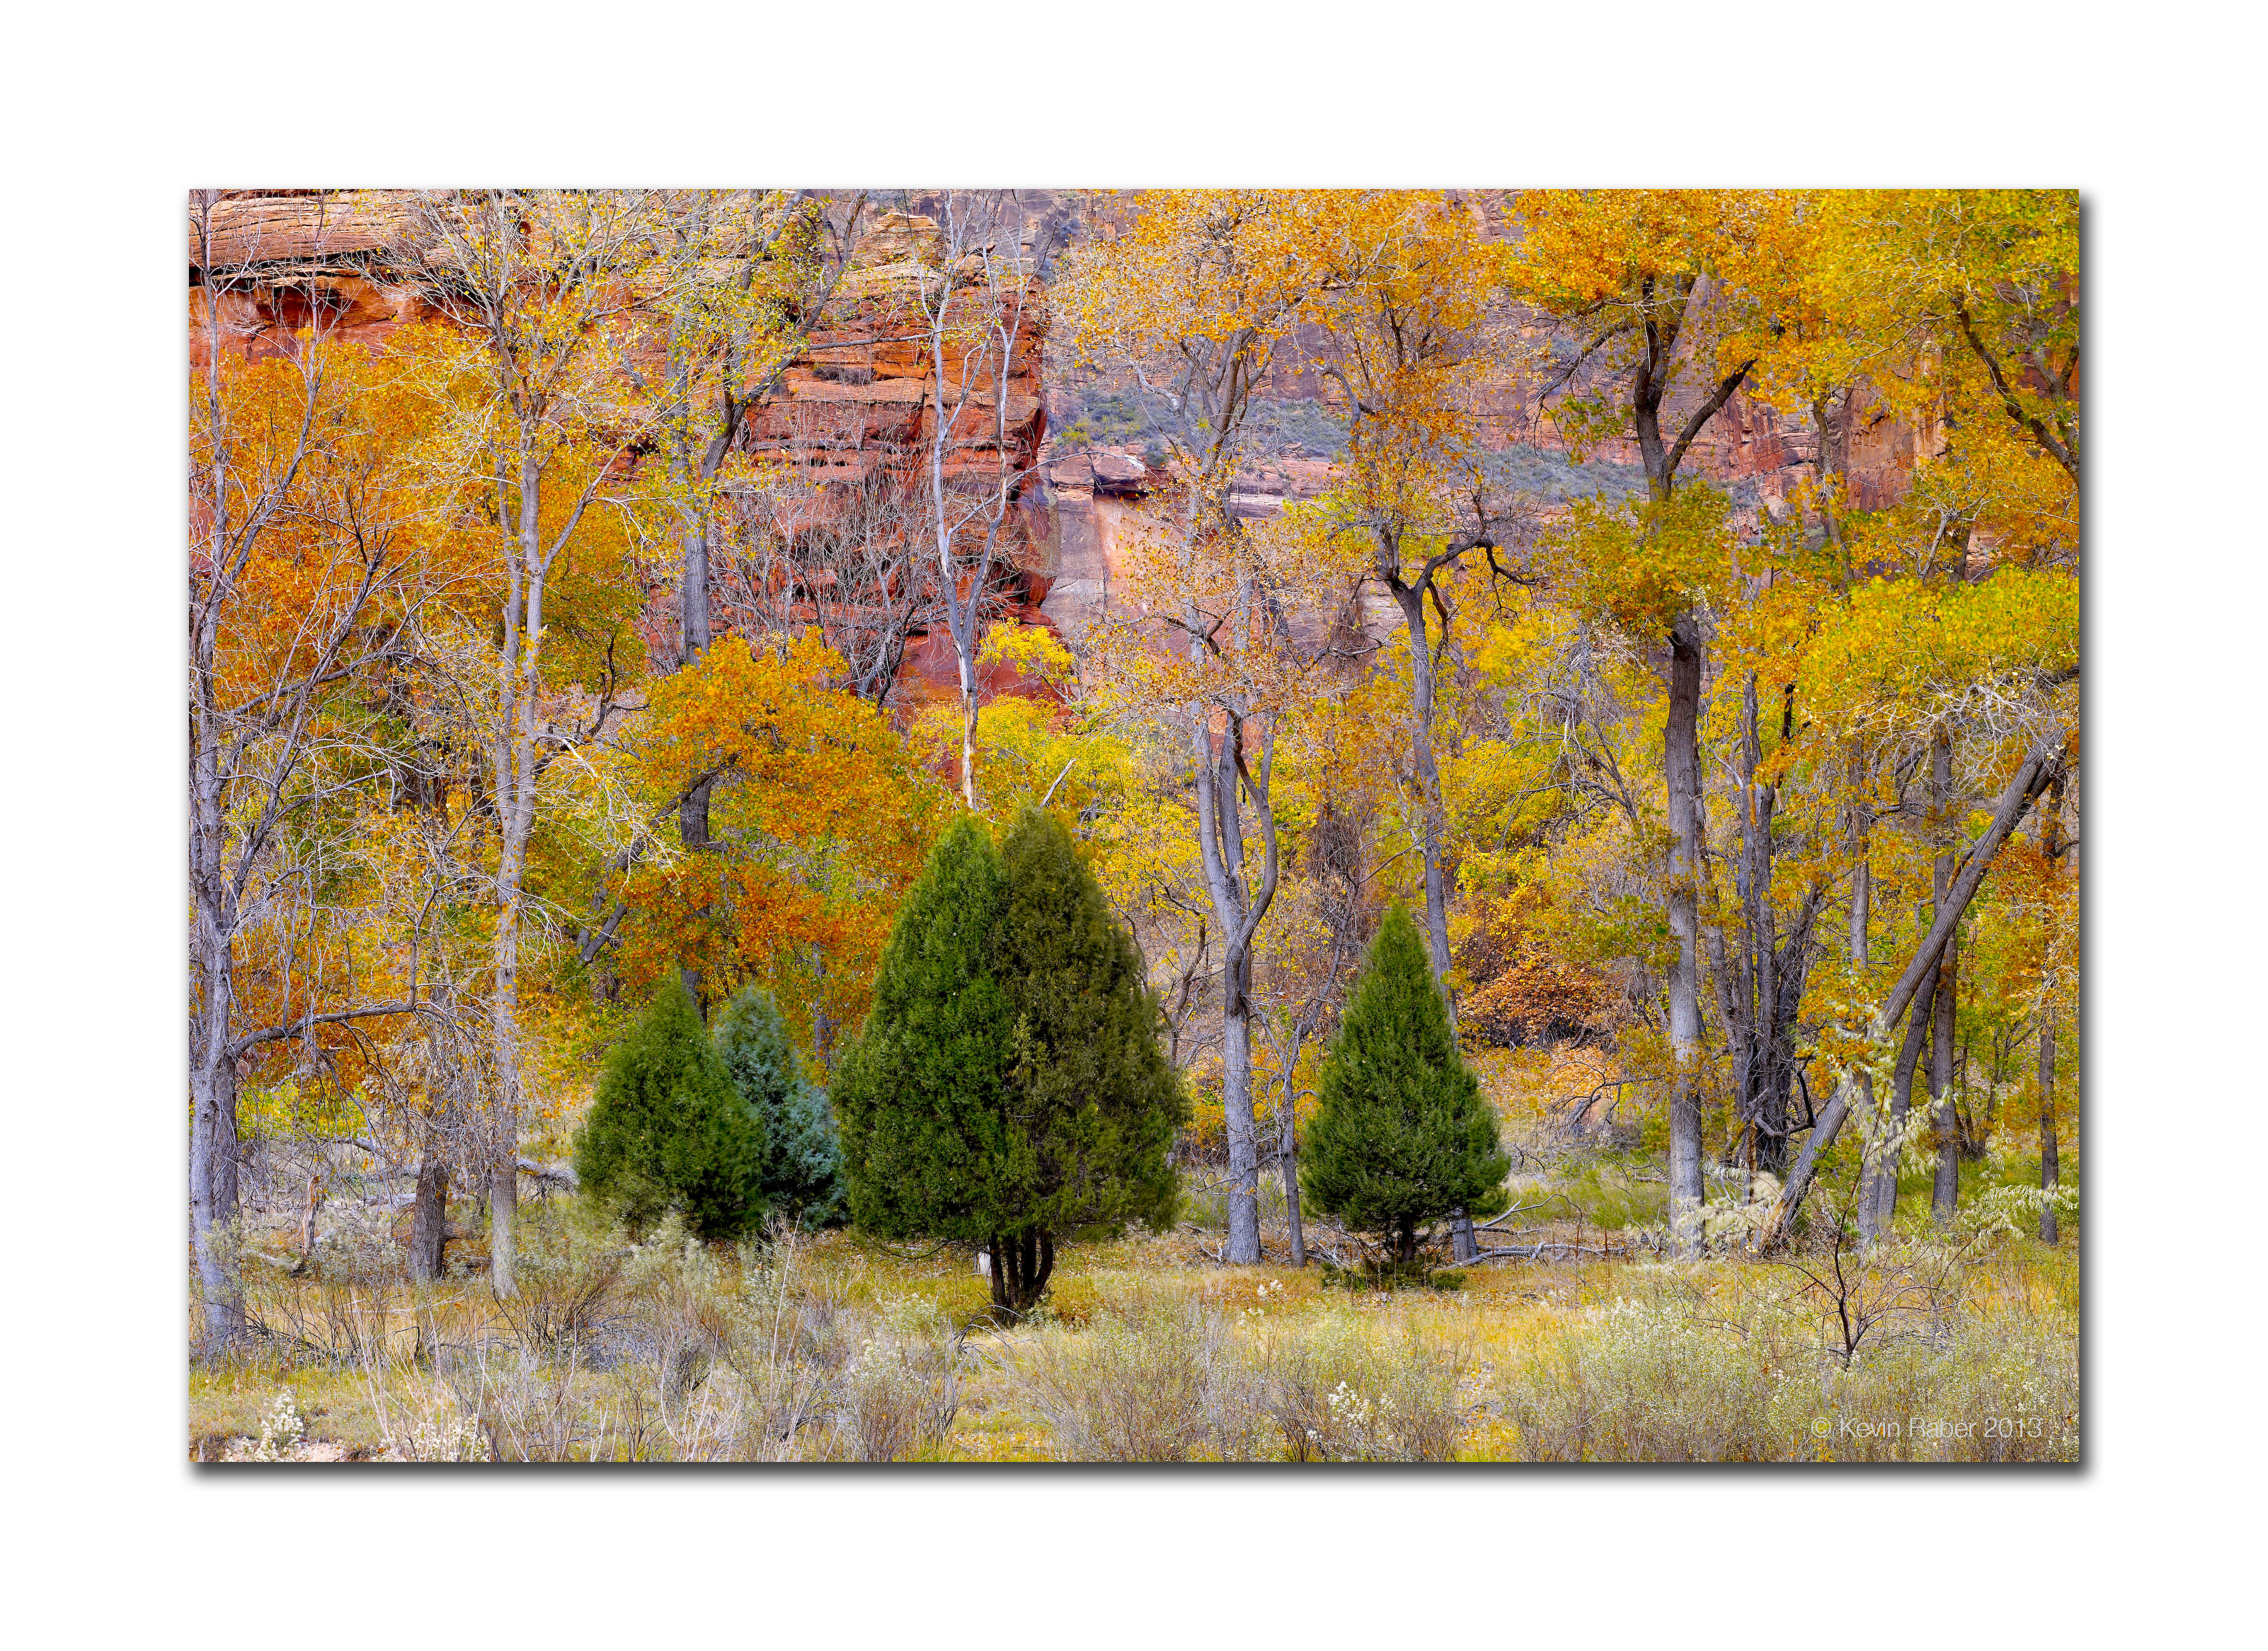 Fall Colors In Zion National Park  2011